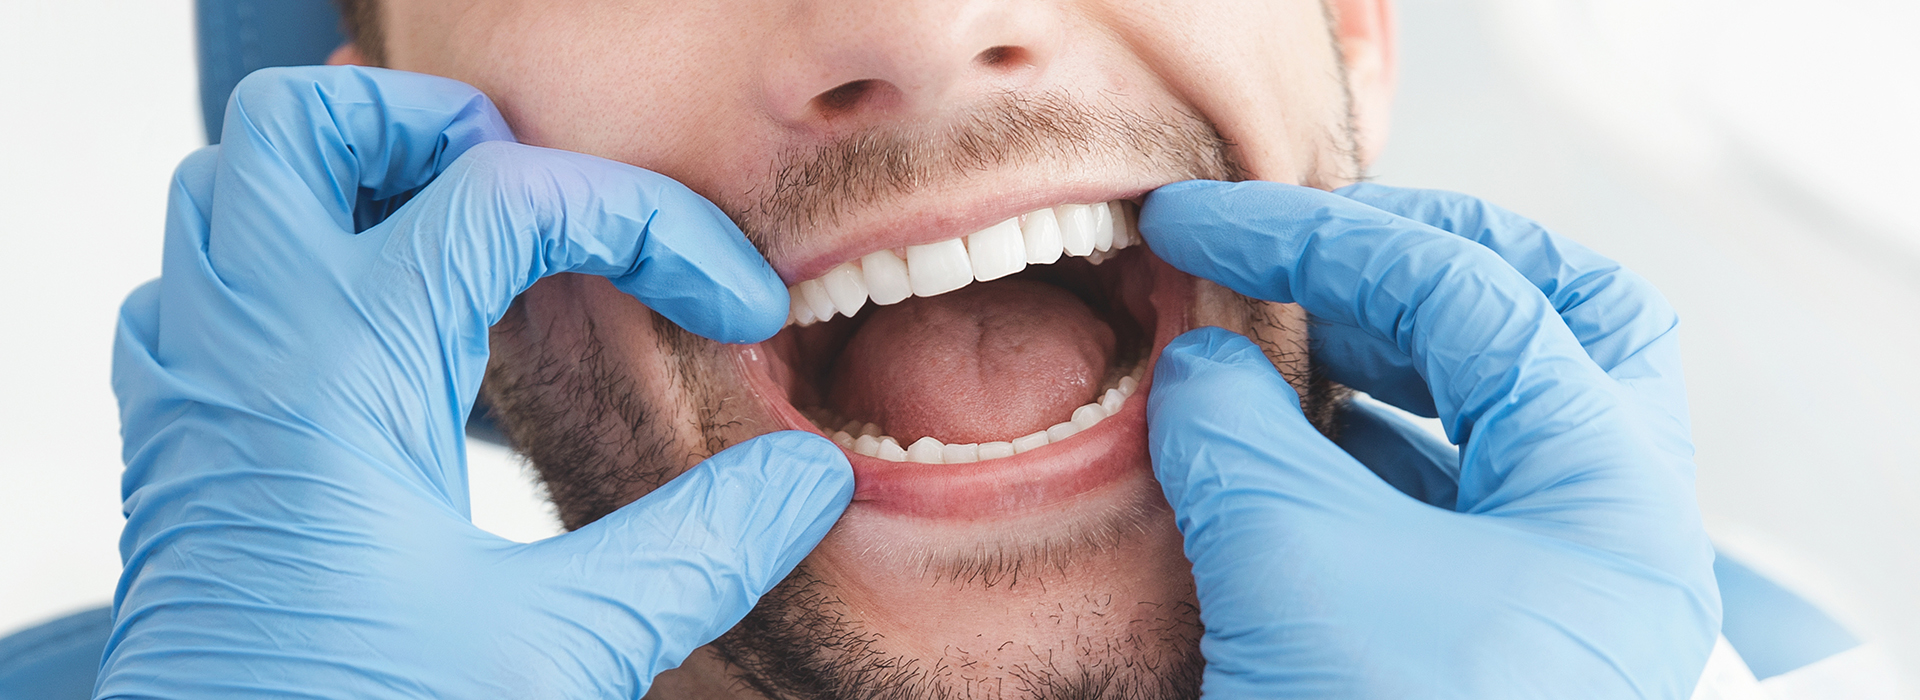 Park Street Dental Associates | Implant Dentistry, Teeth Whitening and Oral Cancer Screening